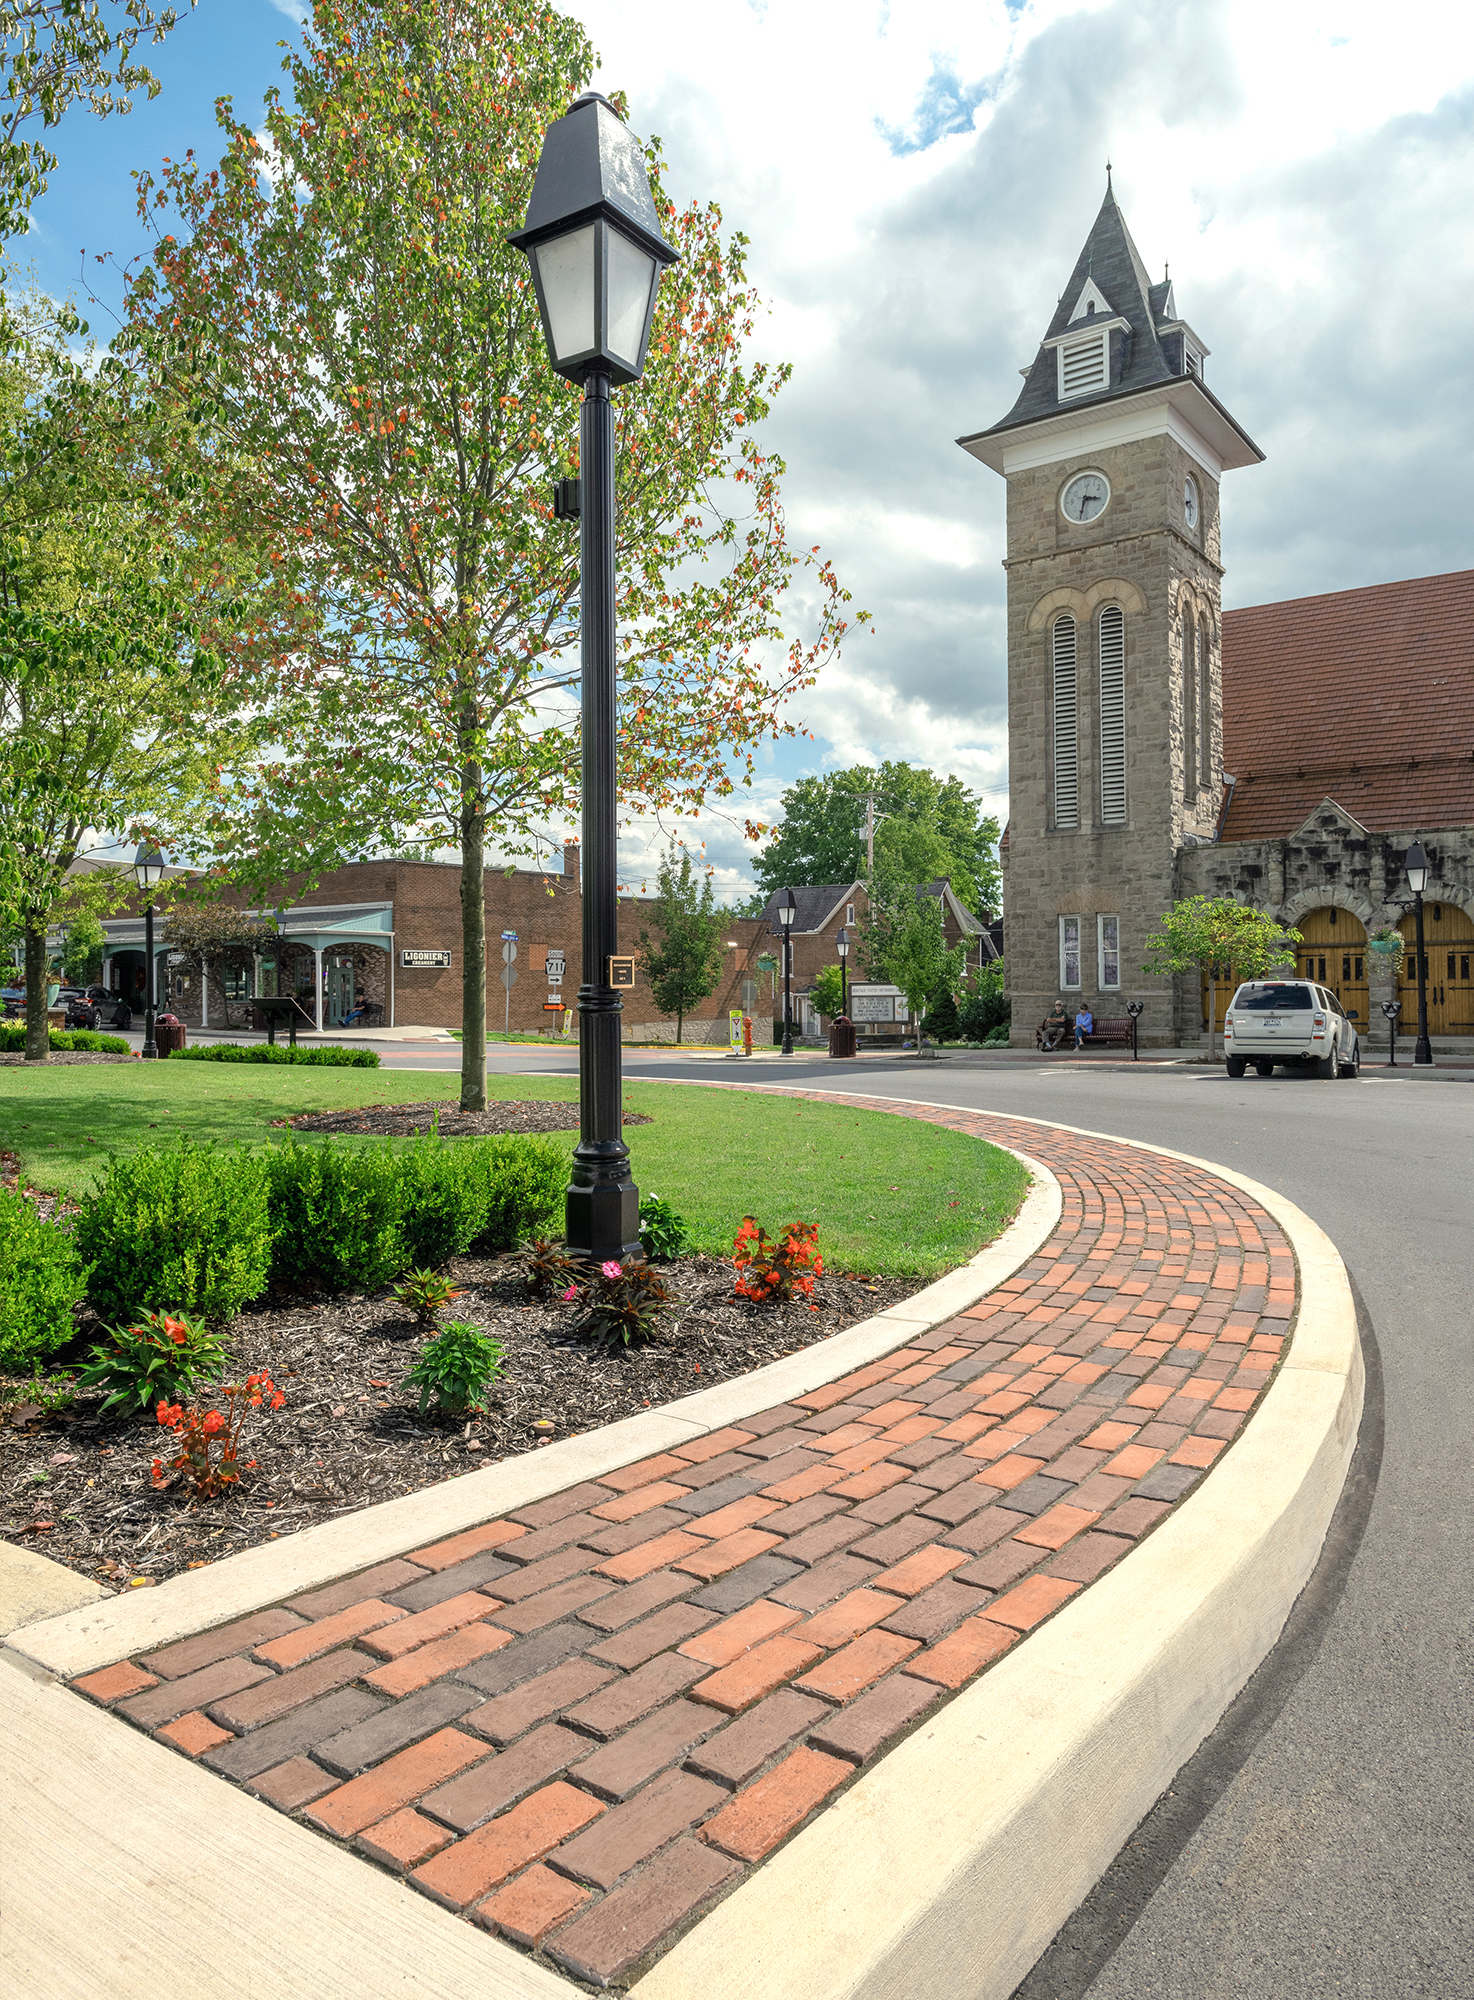 Town Hall pavers in red tones created a rounded sidewalk on the outskirts of a park across from a historic building with a clock tower.